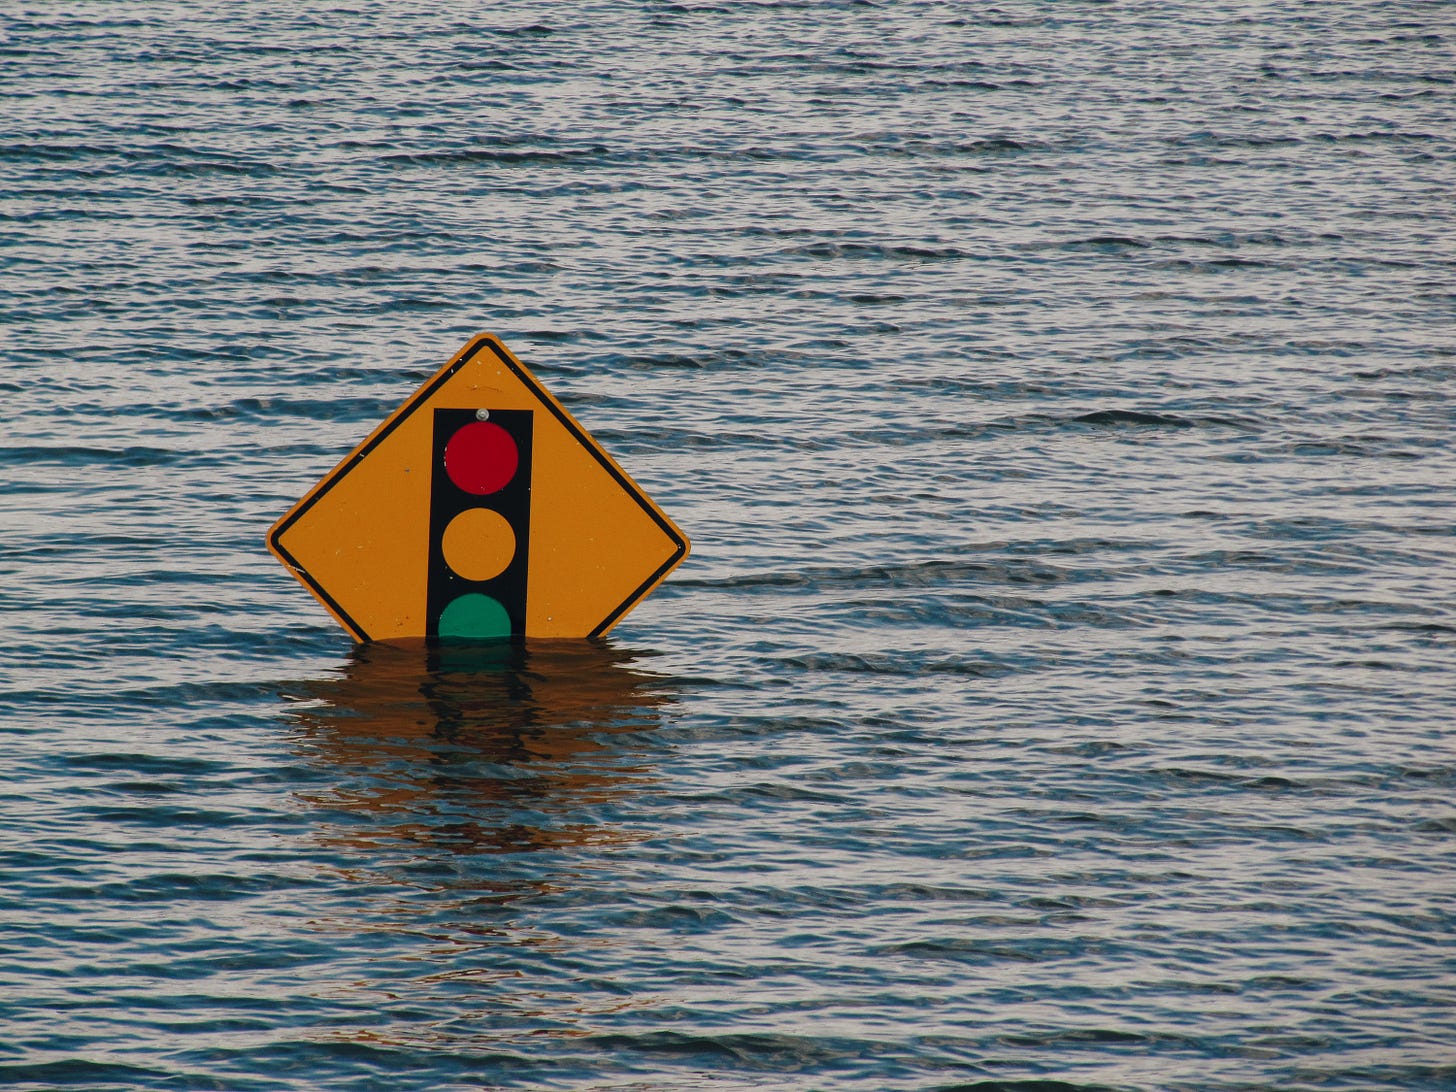 A sign with a traffic light symbol is mostly underwater.